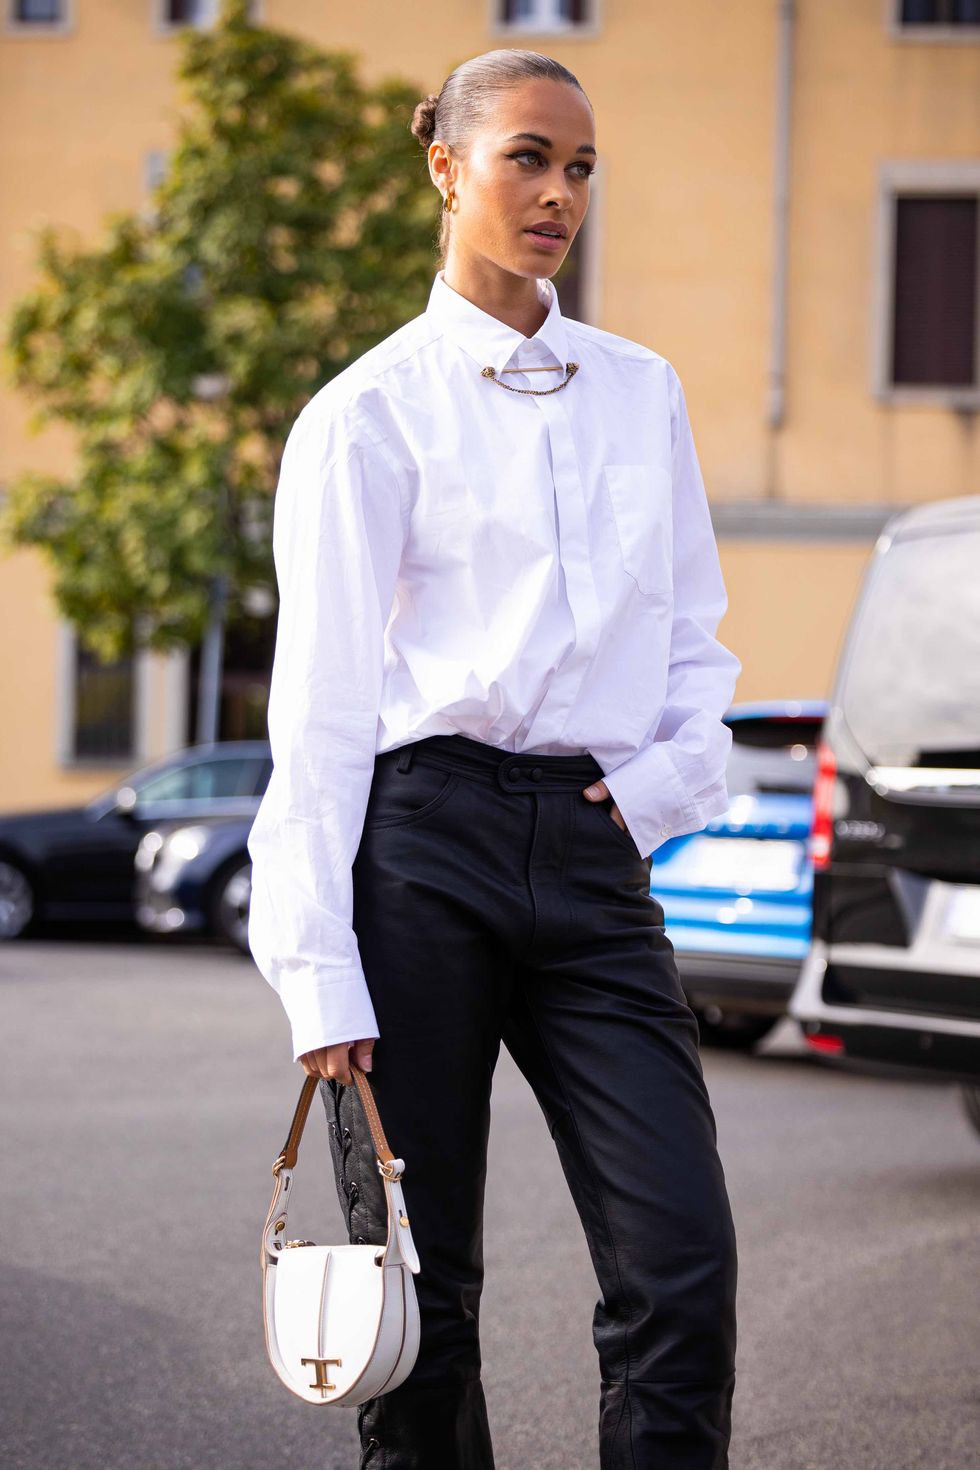 What To Wear To The Office In The Summer | Summer Work Outfits